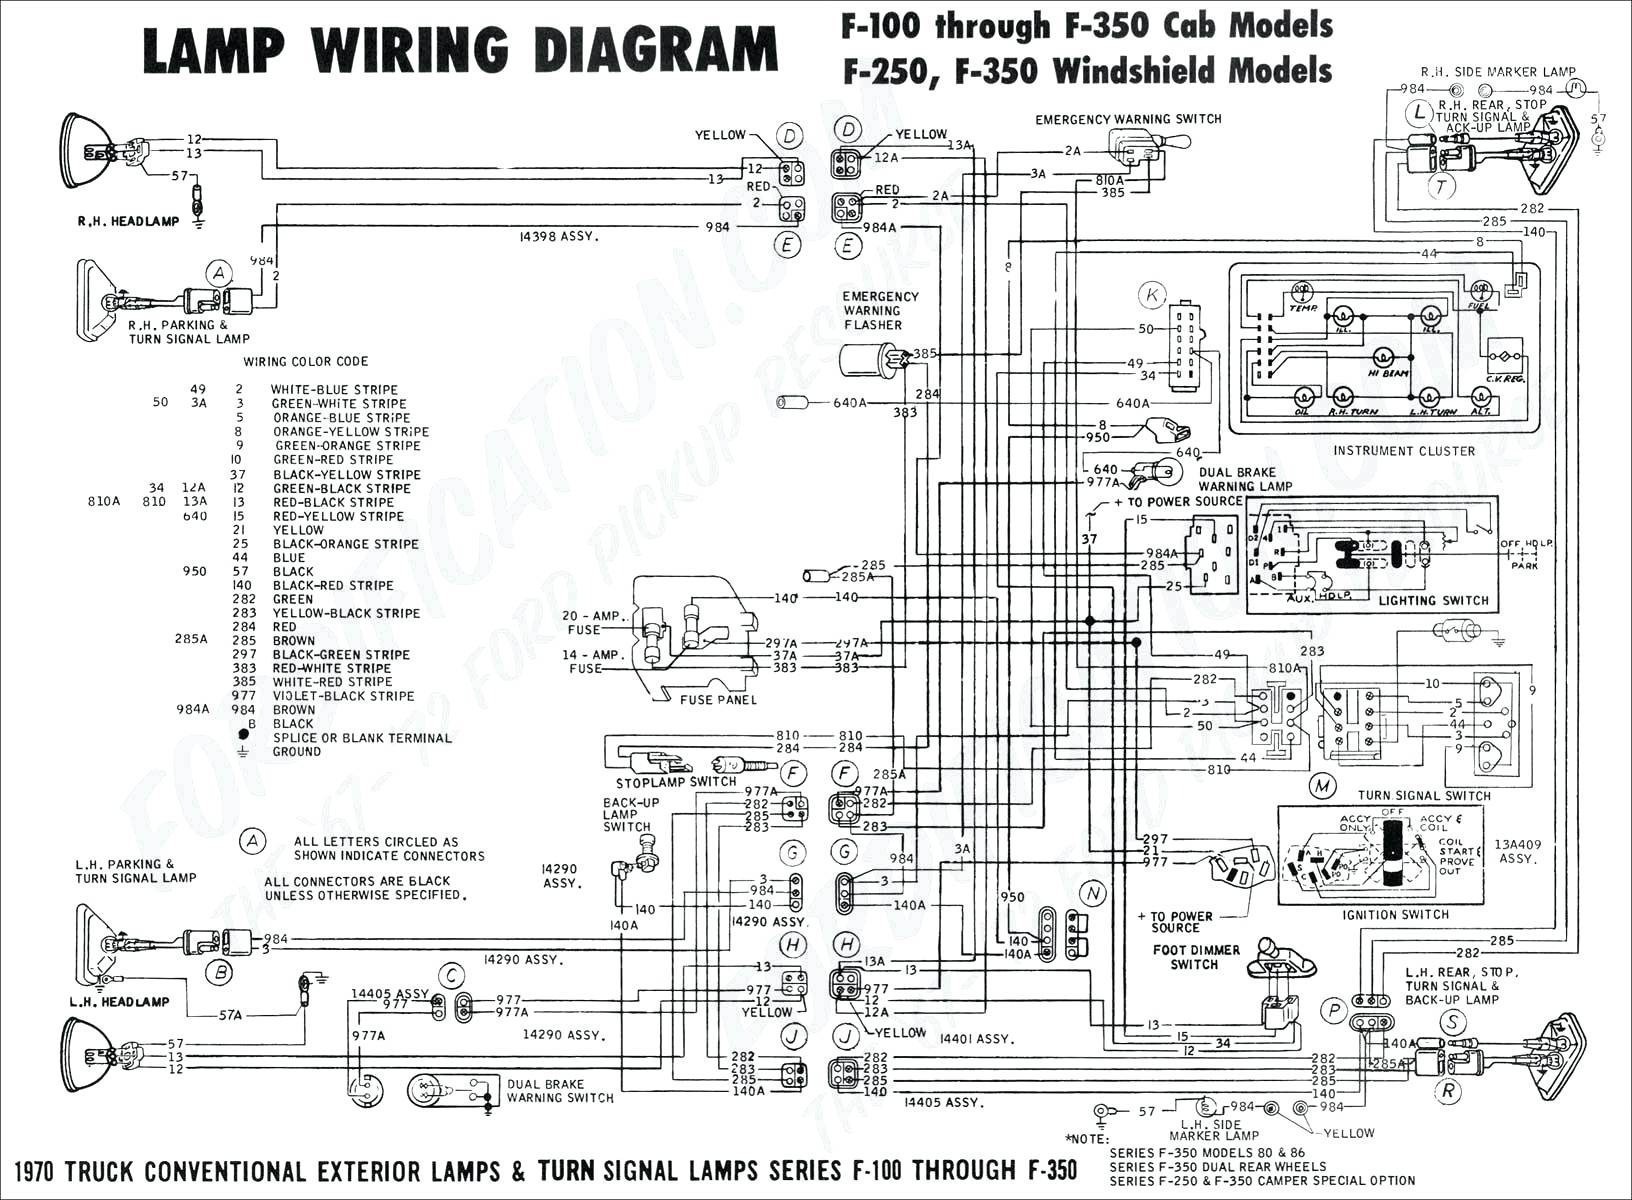 Wiring Diagram Led Driving Lights New Wiring Diagram for Drl Relay Save Wiring Diagram for Daytime